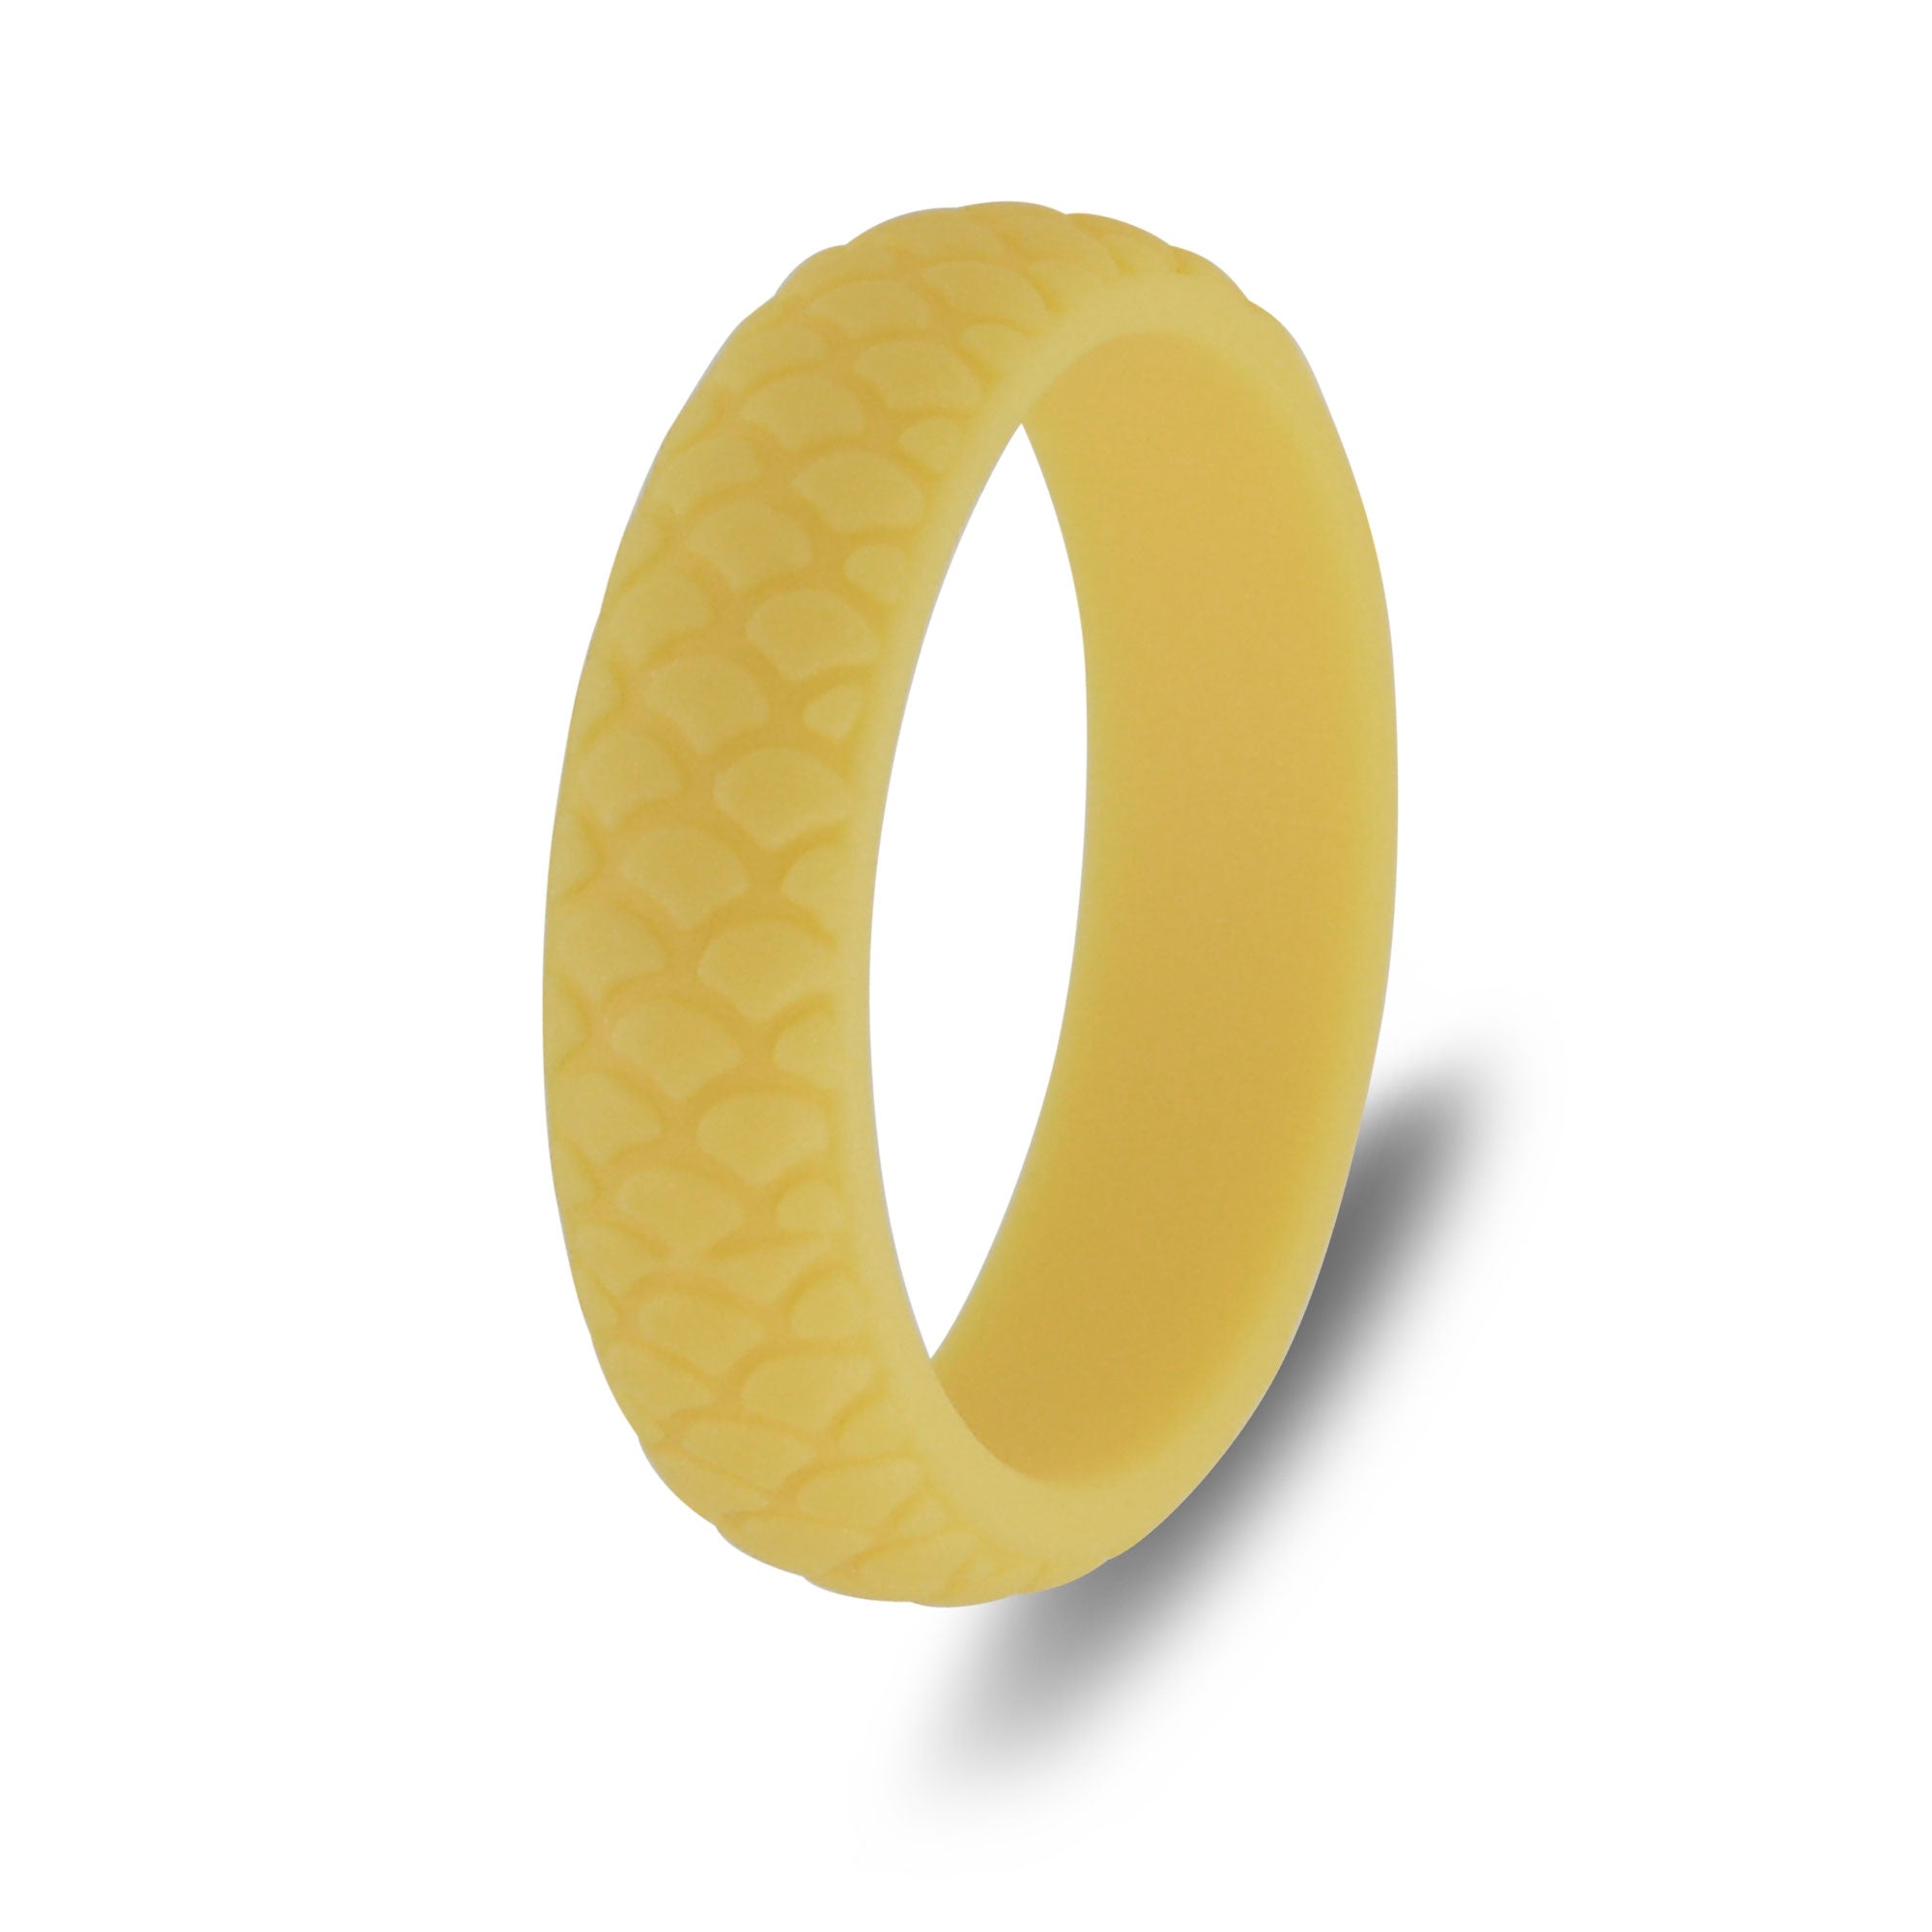 The Amber Reef - Silicone Ring